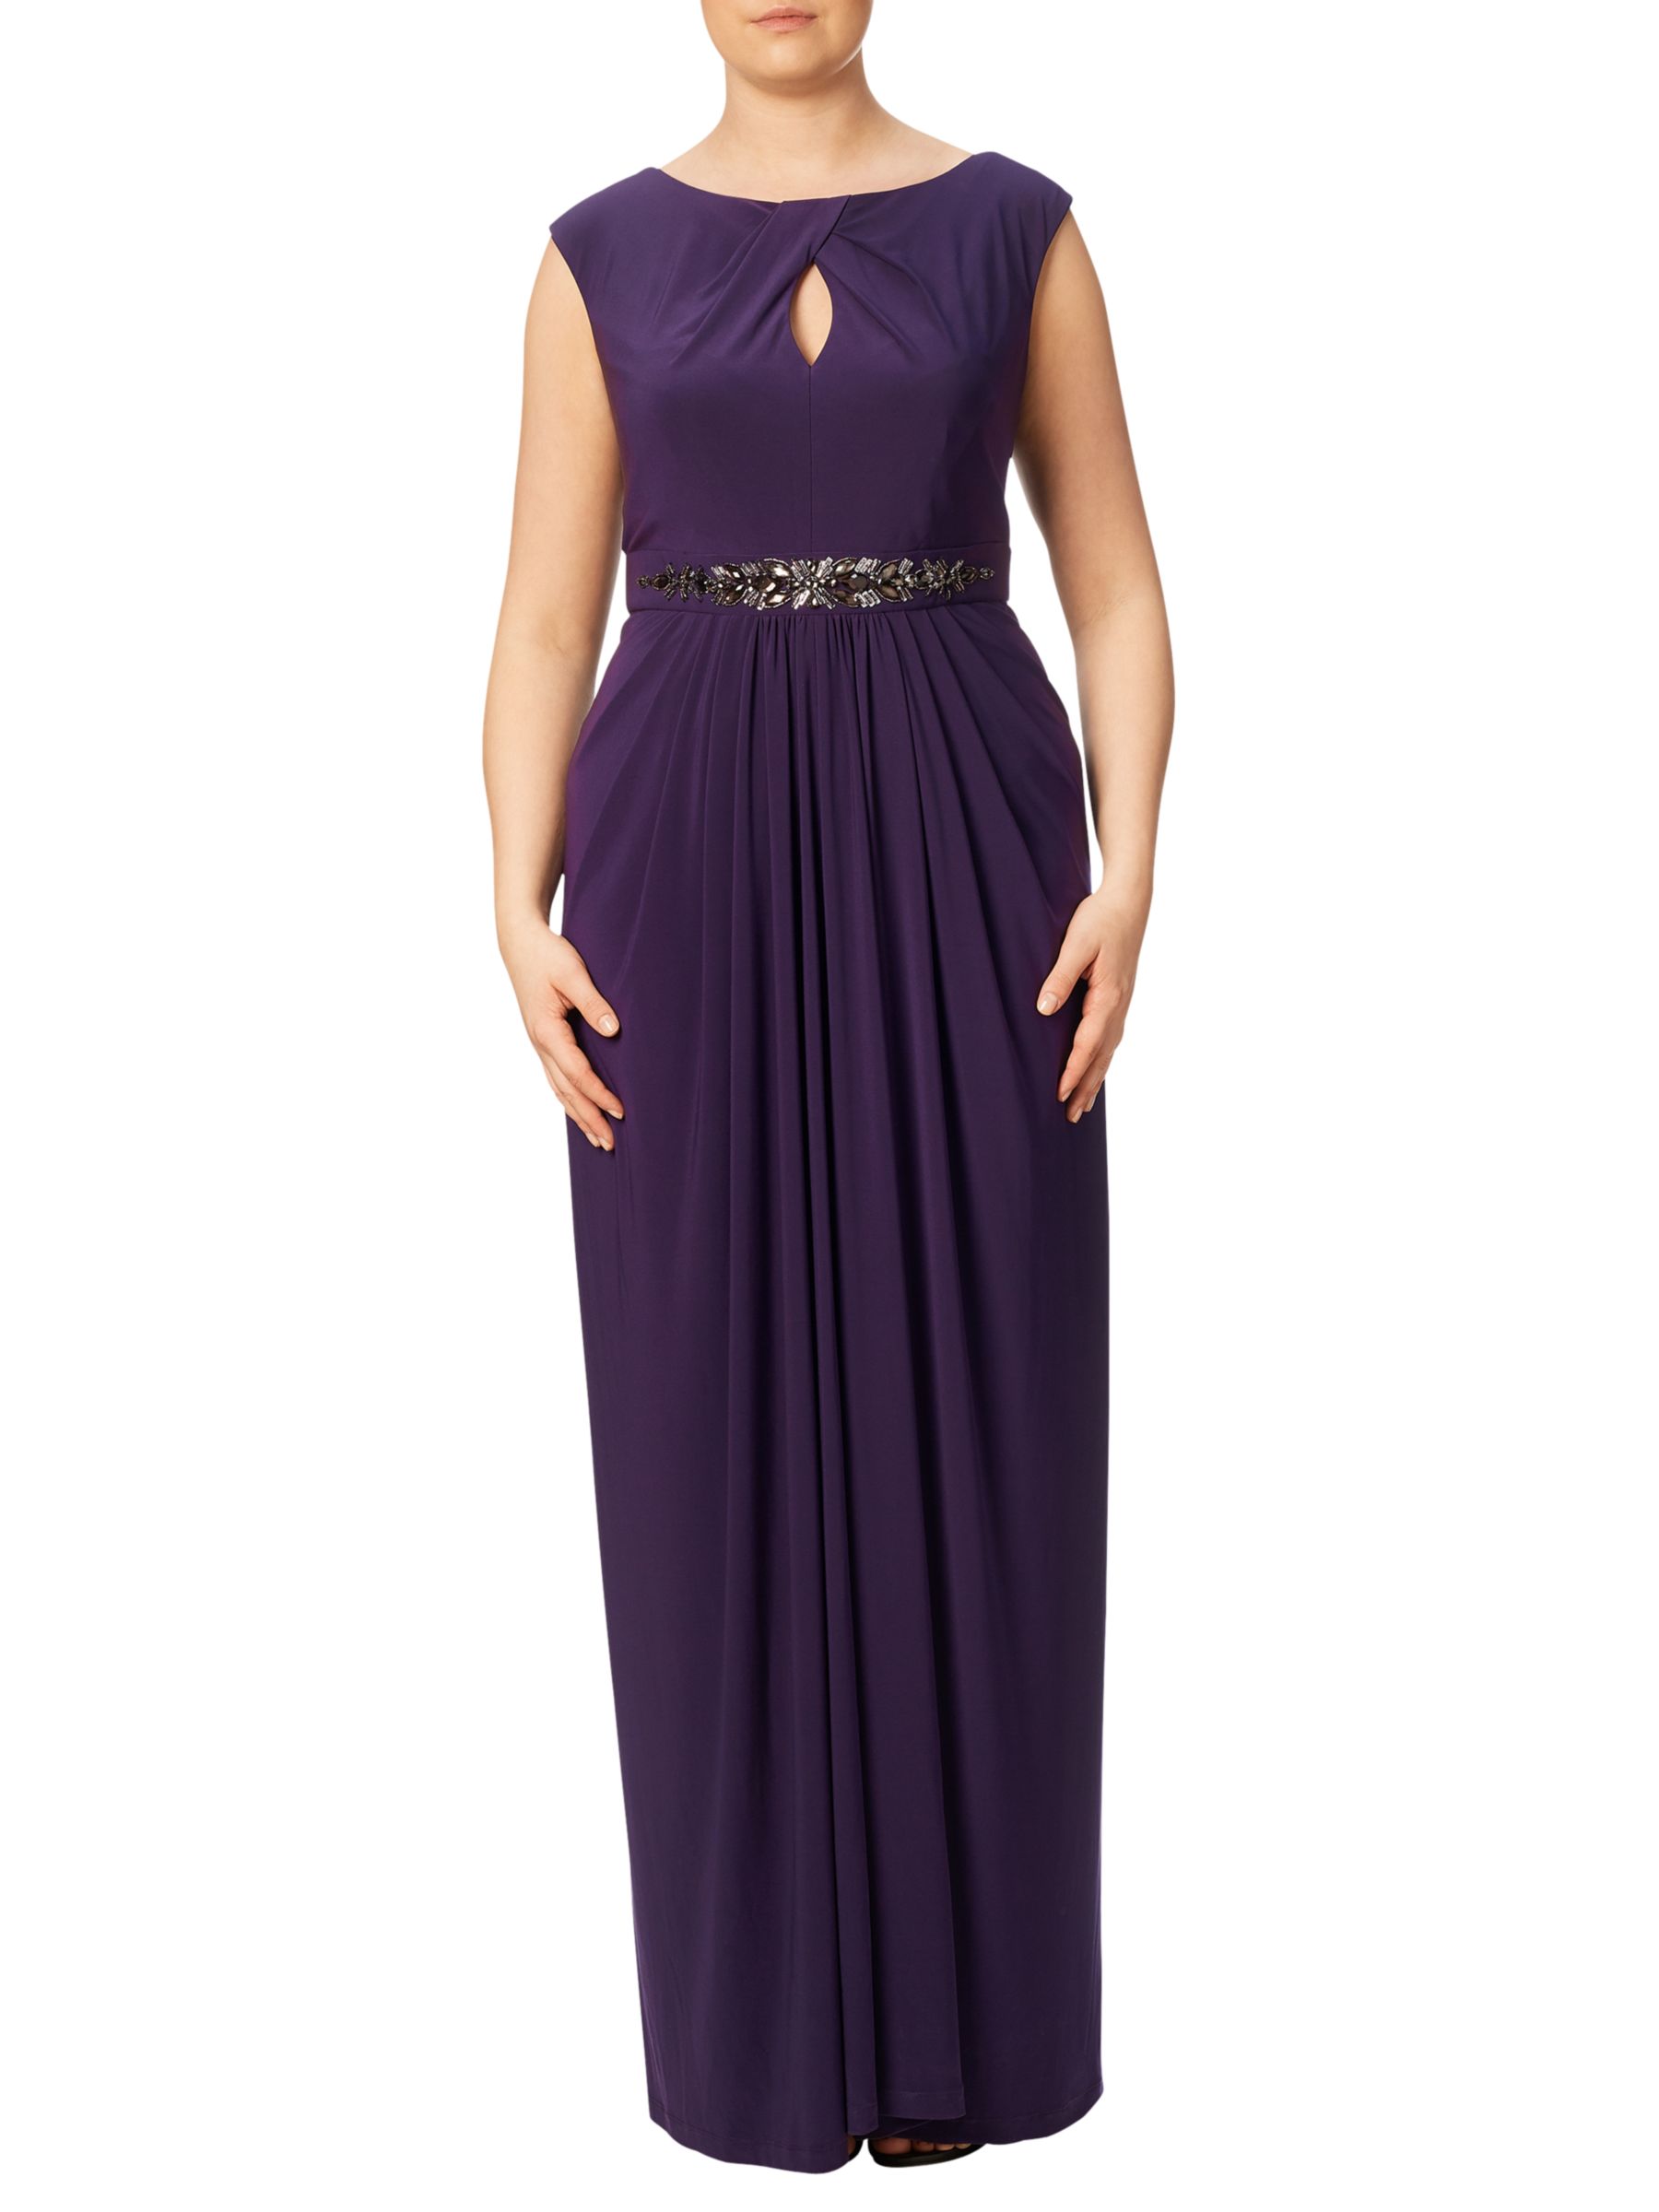 Adrianna Papell Plus Size Keyhole Detail Embellished Jersey Gown, Aubergine